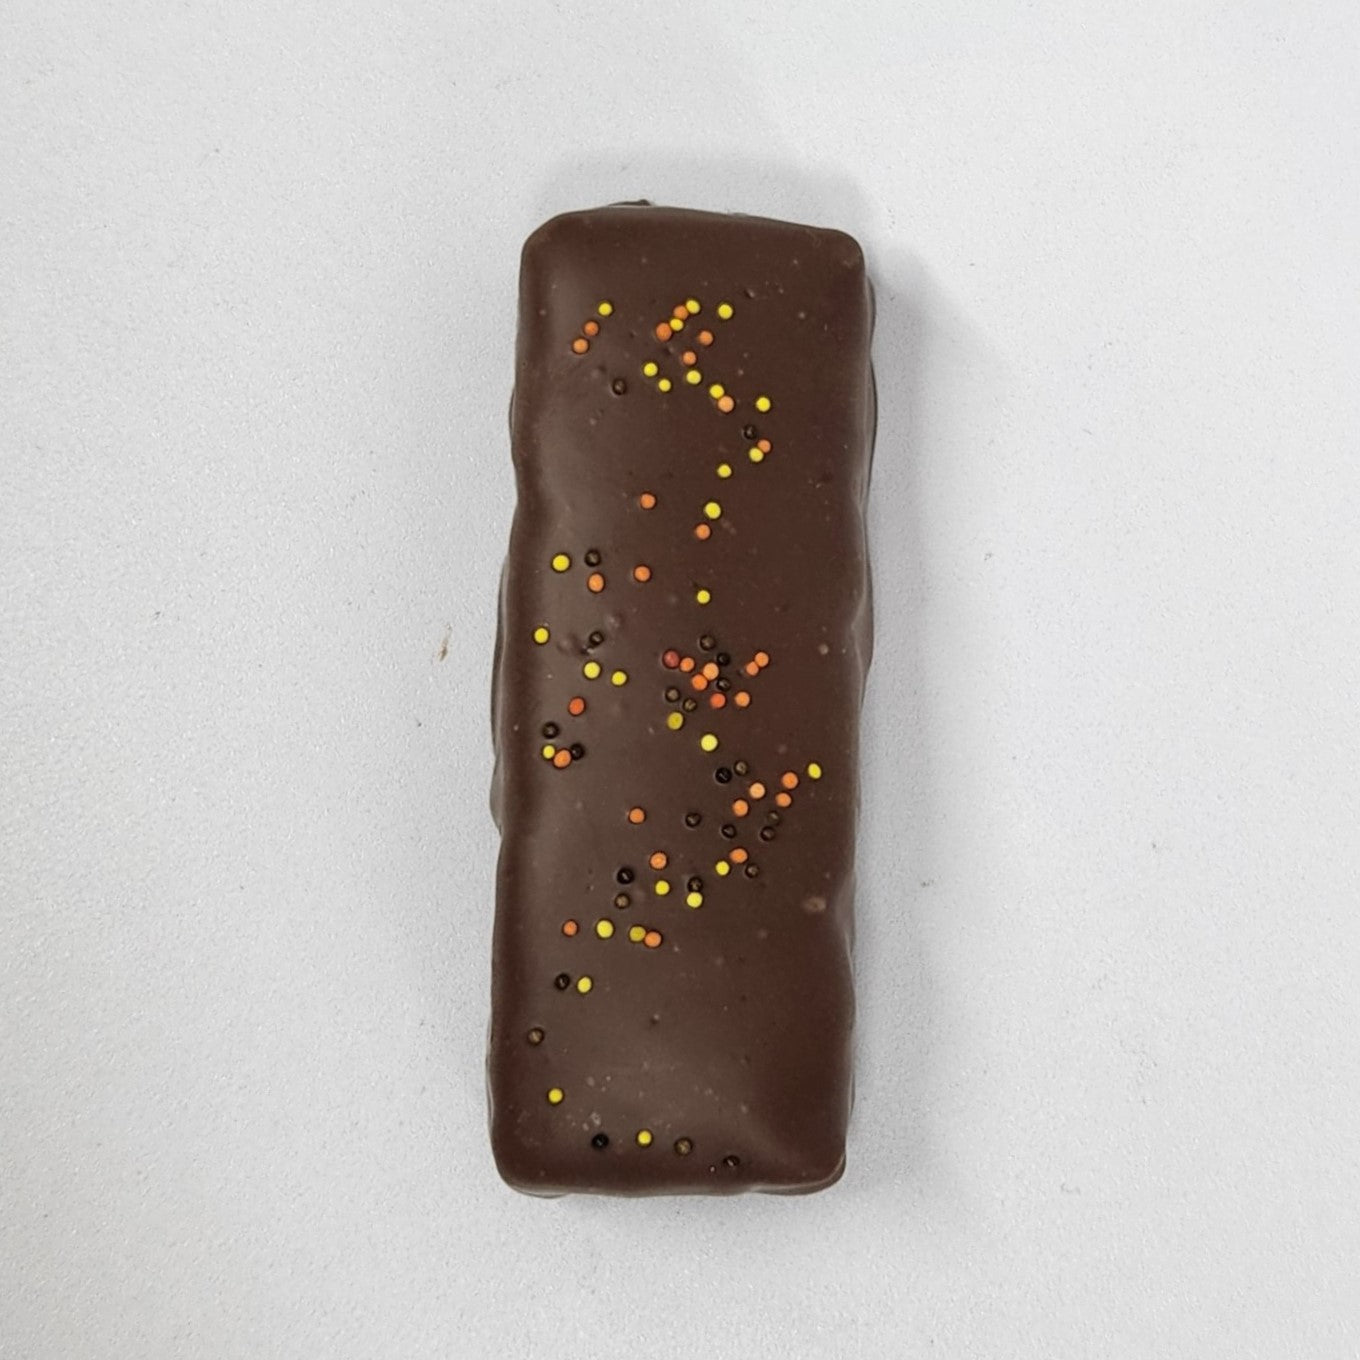 Handcrafted Peanut Butter Bar made with milk chocolate and peanut butter puffs